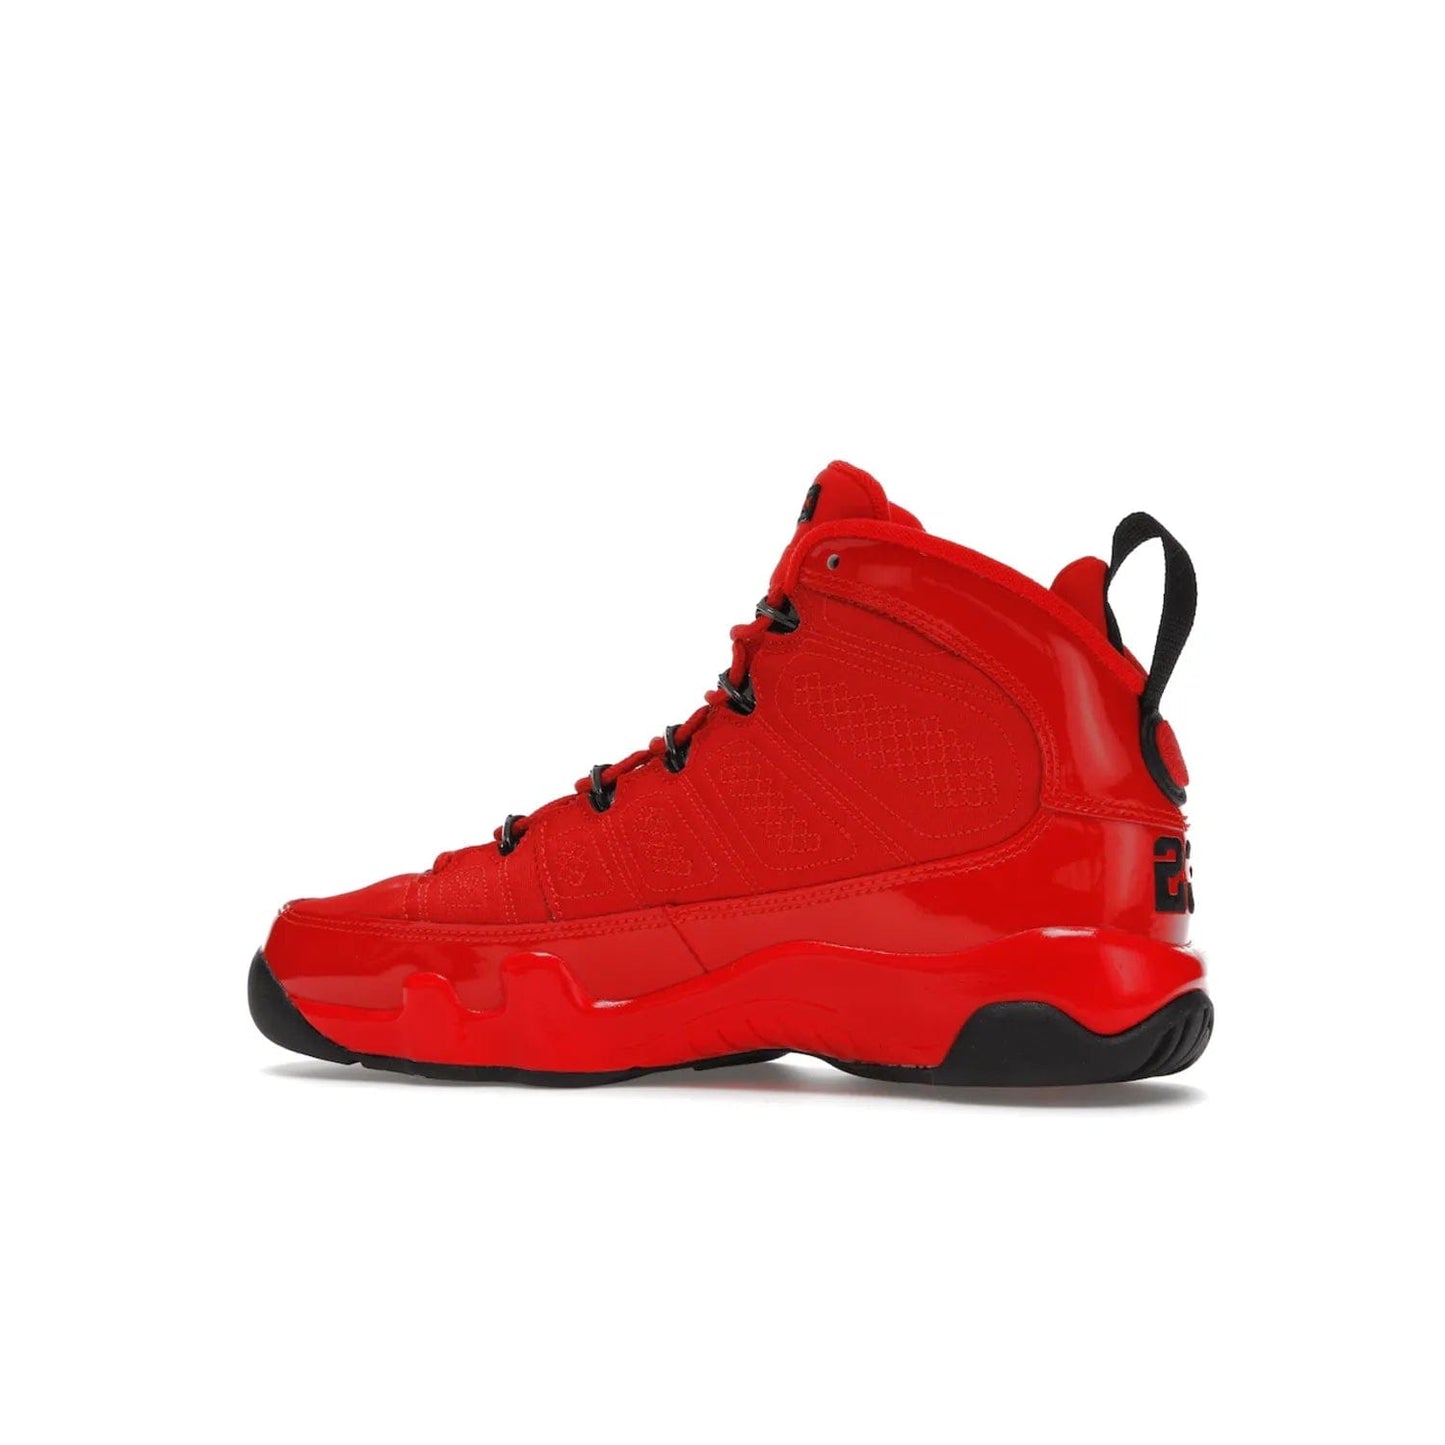 Jordan 9 Retro Chile Red (GS) - Image 21 - Only at www.BallersClubKickz.com - Introducing the Air Jordan 9 Retro Chile Red (GS), a vintage 1993 silhouette with fiery colorway. Features quilted side paneling, glossy patent leather, pull tabs, black contrast accents, and foam midsole. Launching May 2022 for $140.